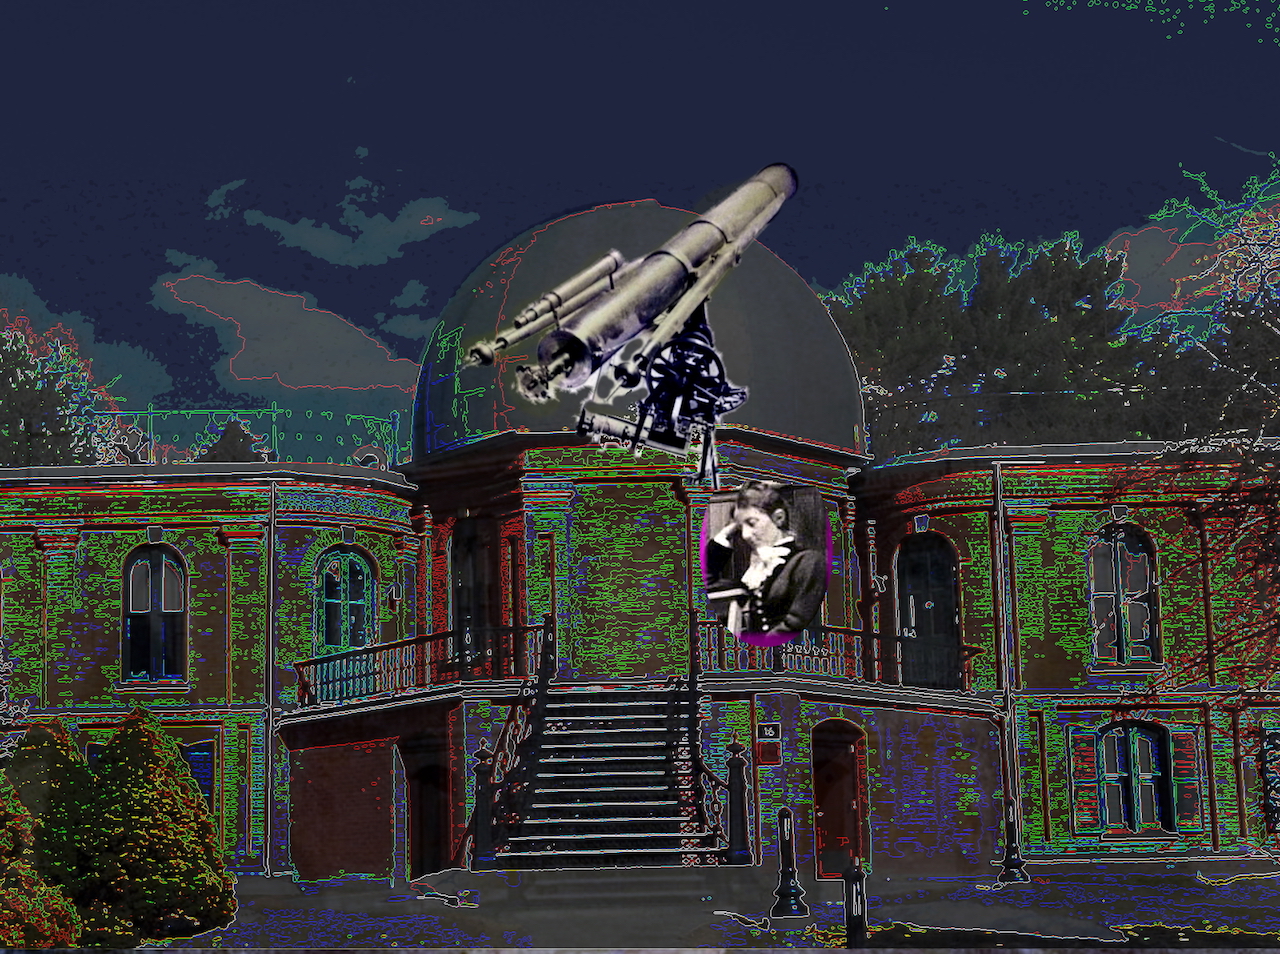 Illustration: Astronomer Mary Watson Whitney timing a photographic plate exposure at the Vassar College Astronomical Observatory